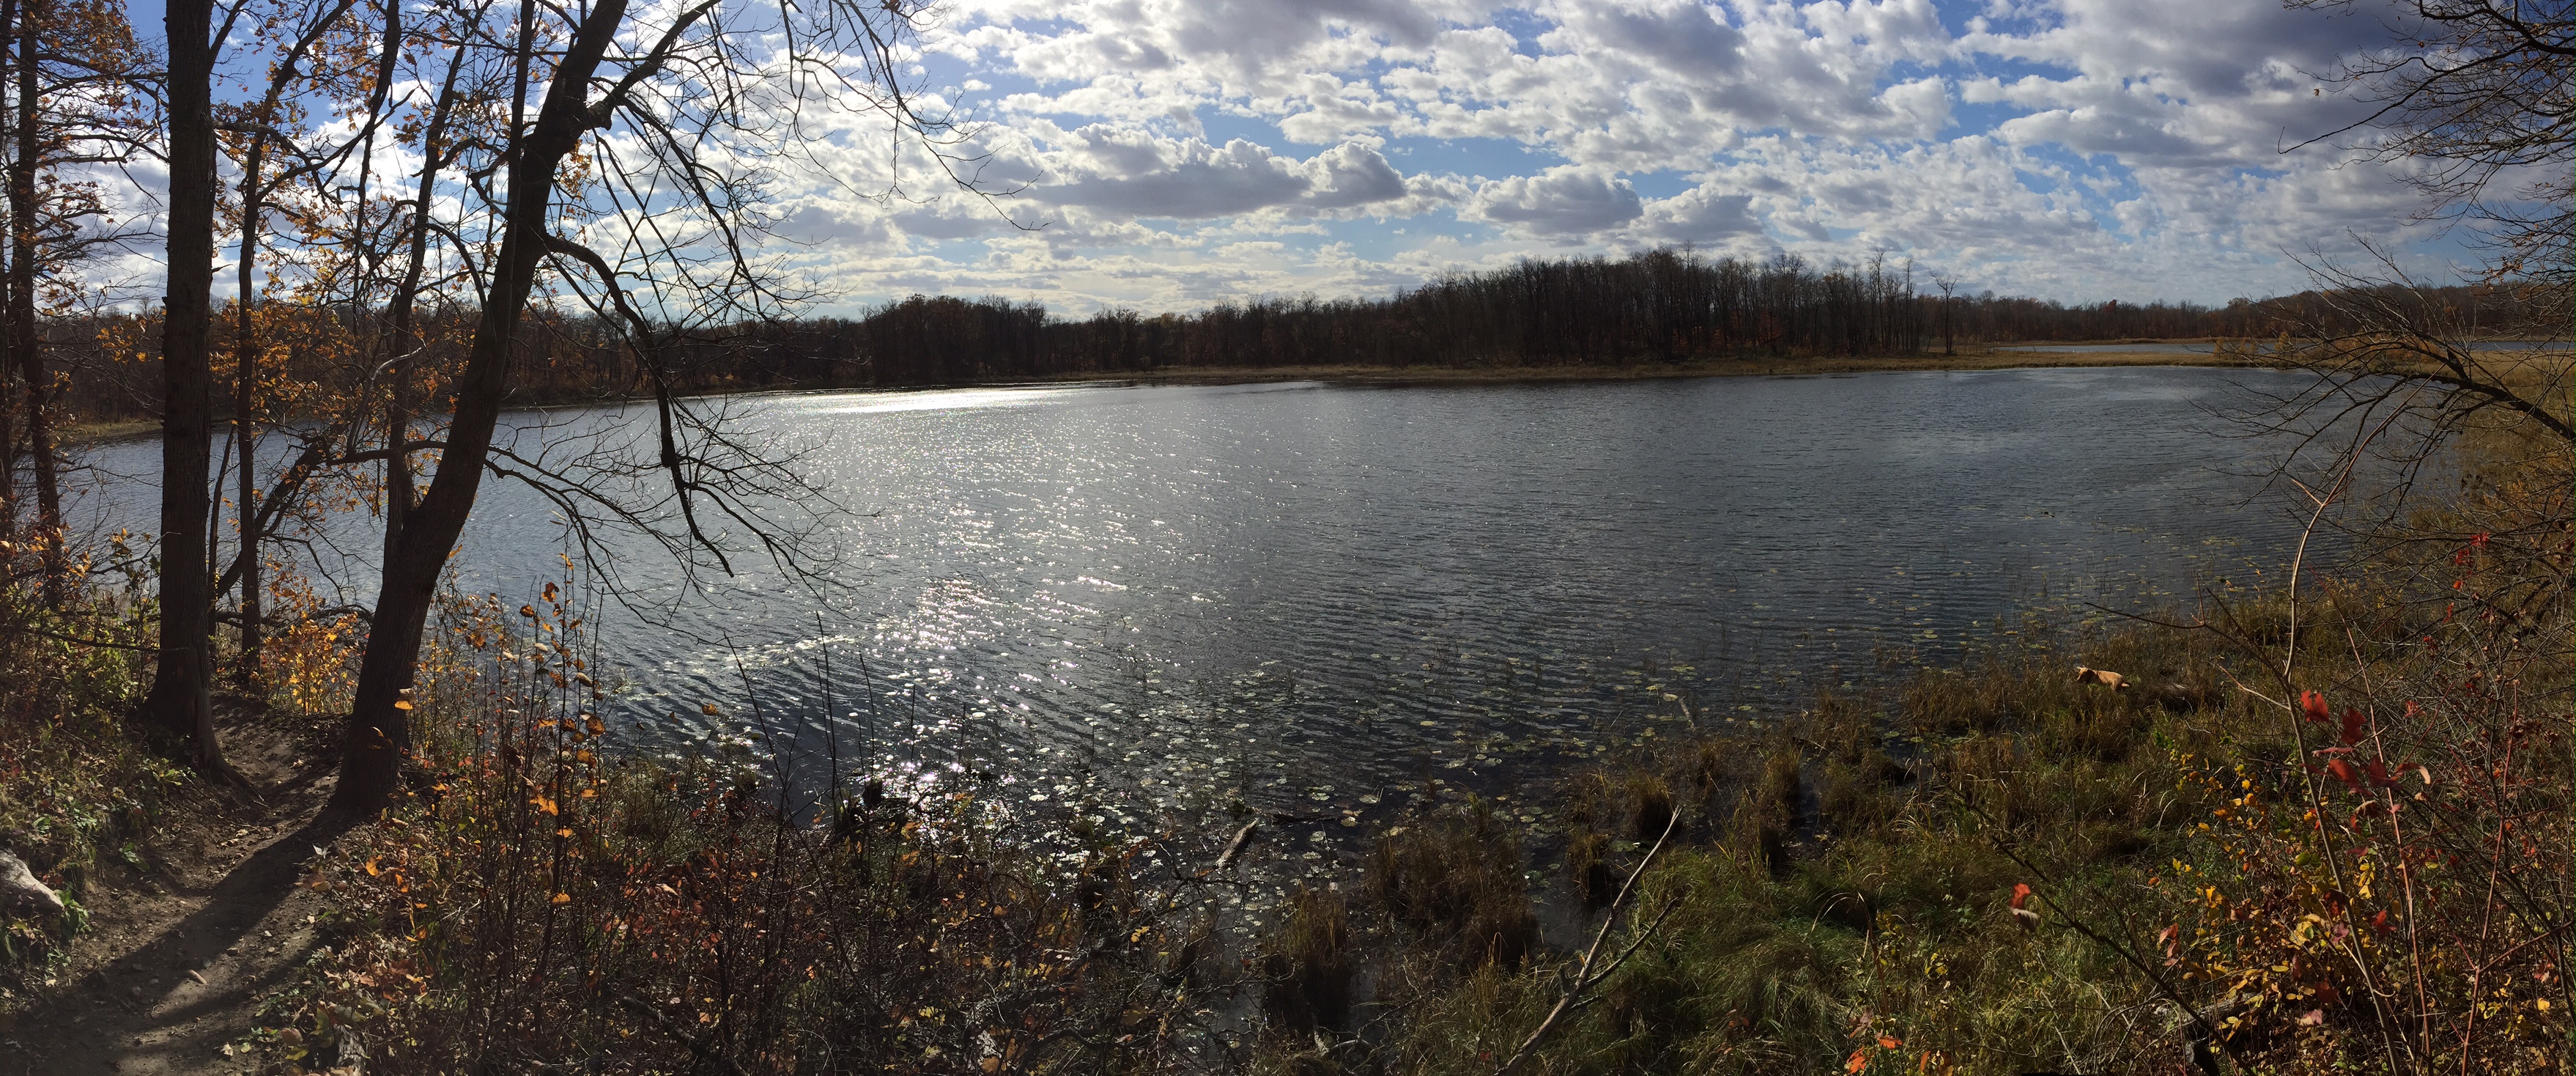 Panoramic view of Twin Lakes from mountain bike trail. October 15th, 2015.